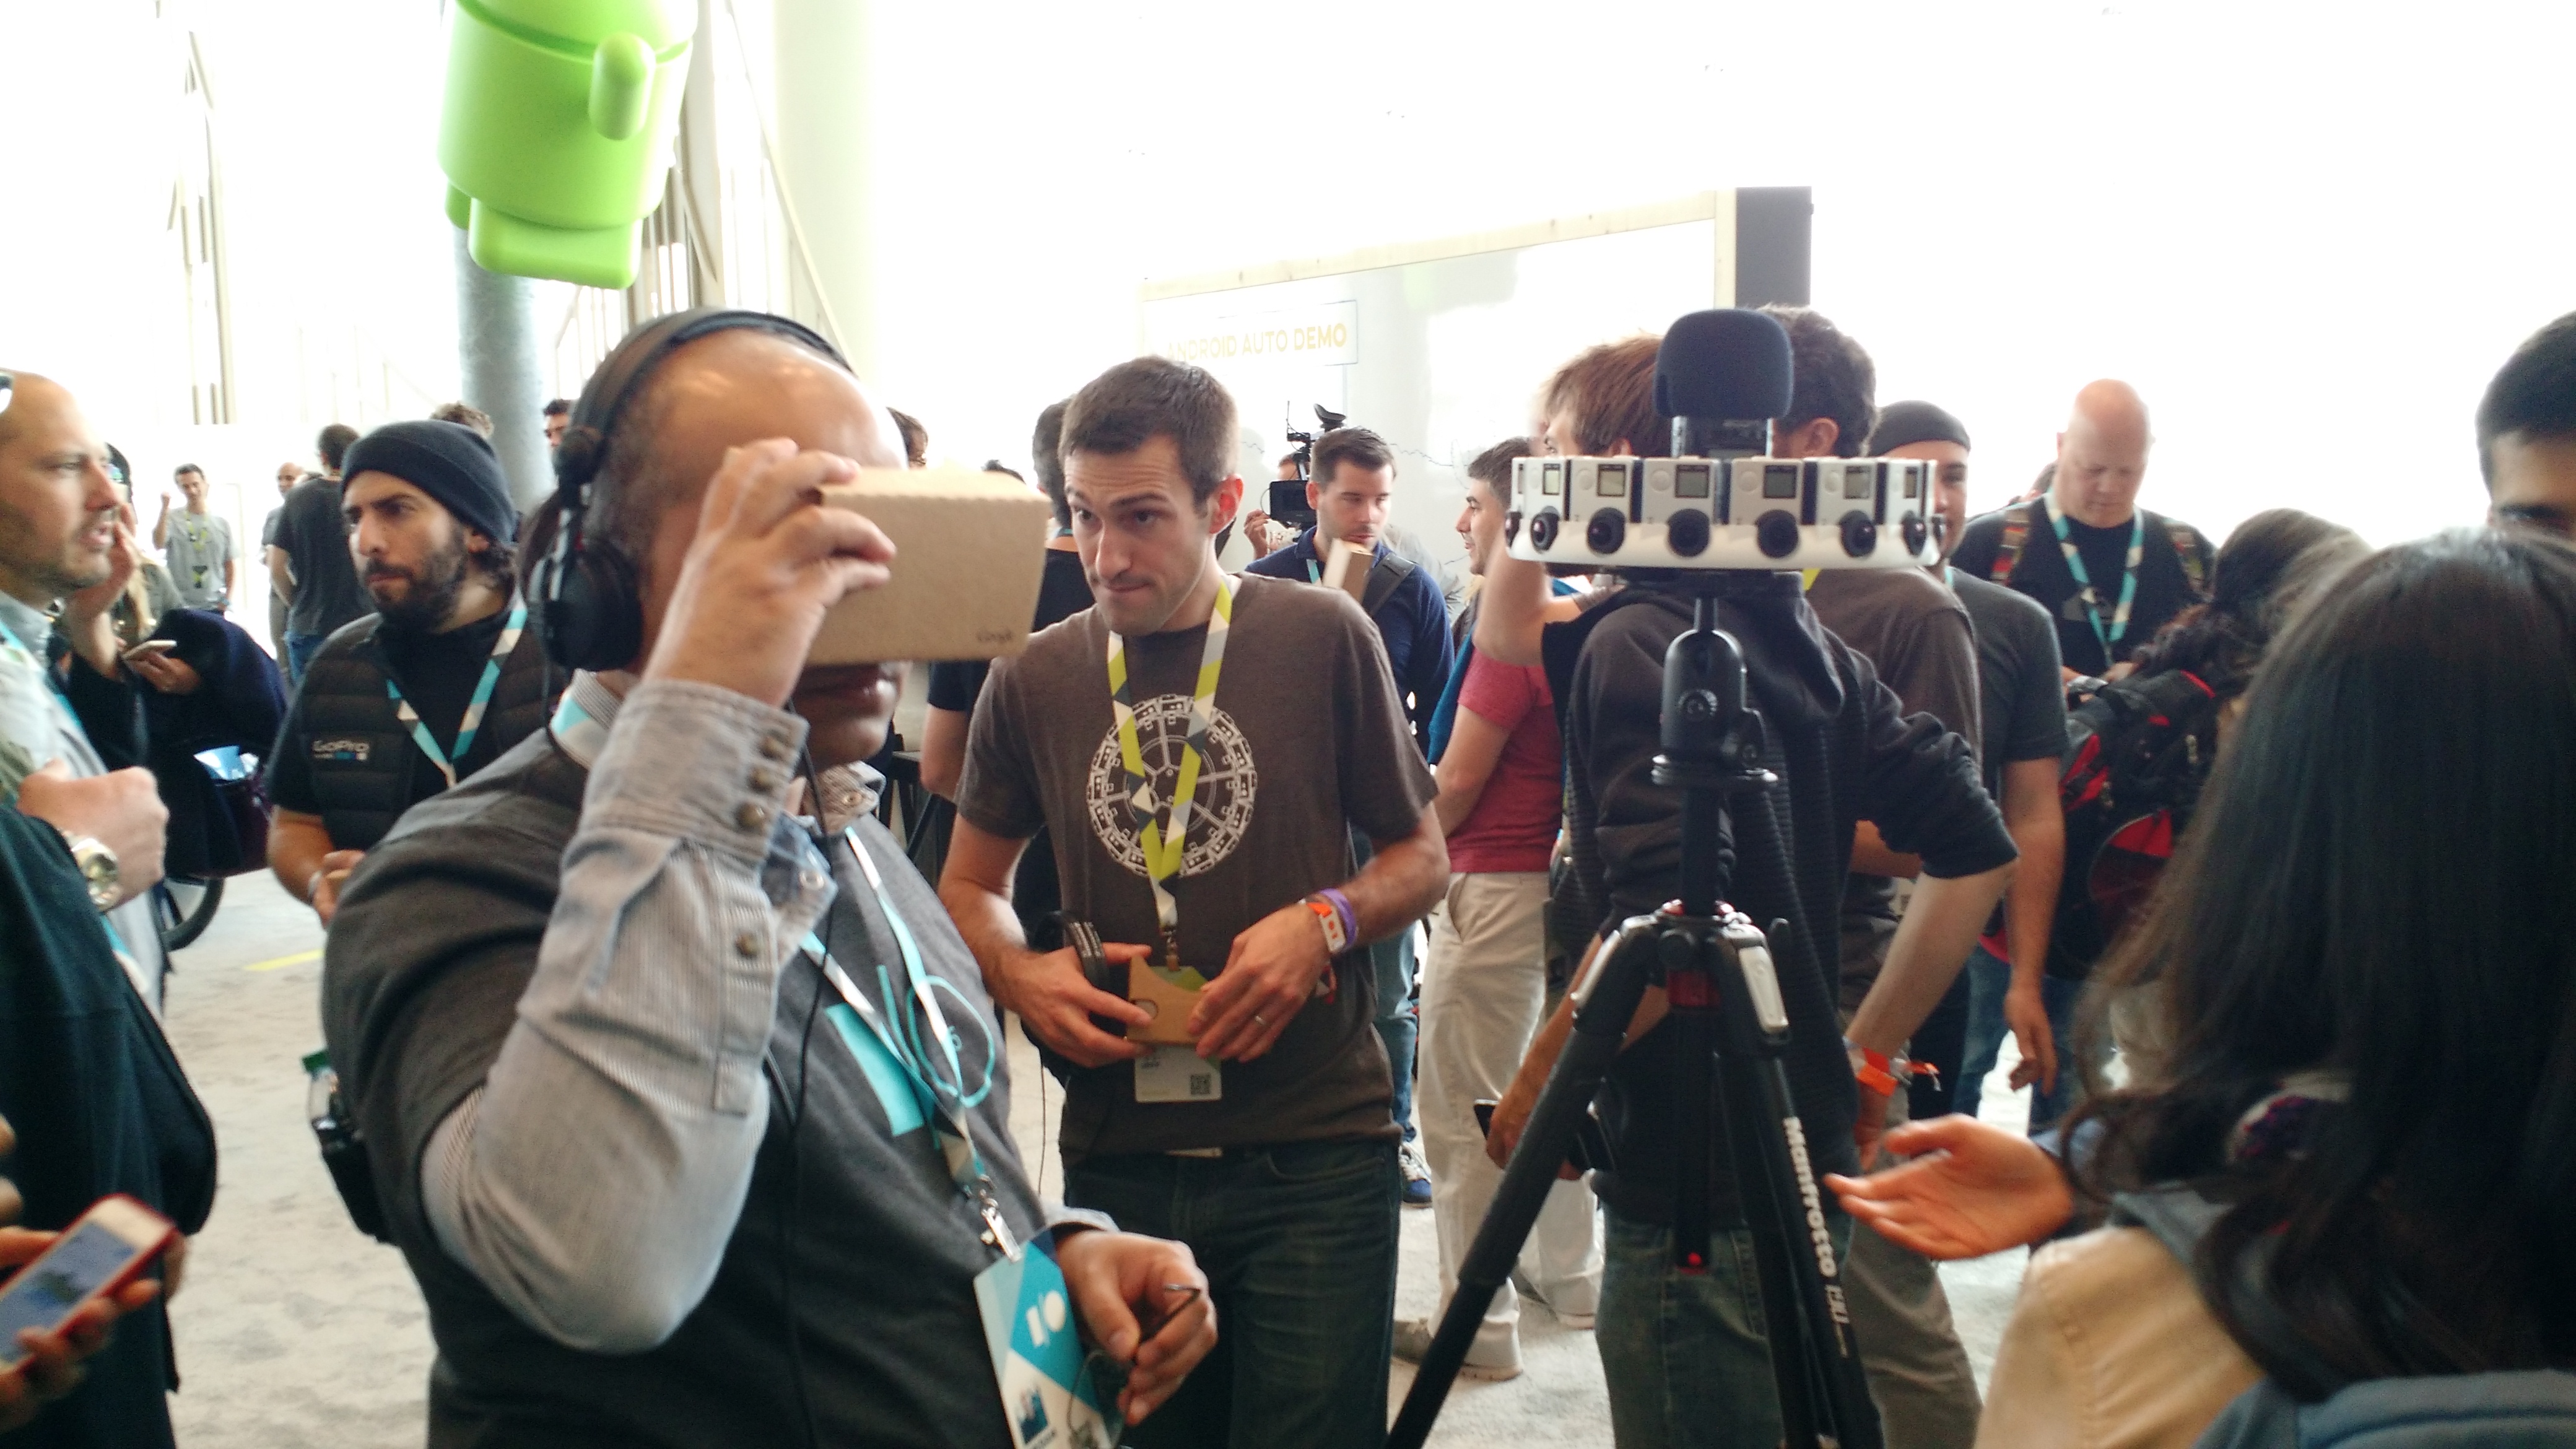 The GoPro Odyssey rig at the Google I/O conference in San Francisco on May 28.